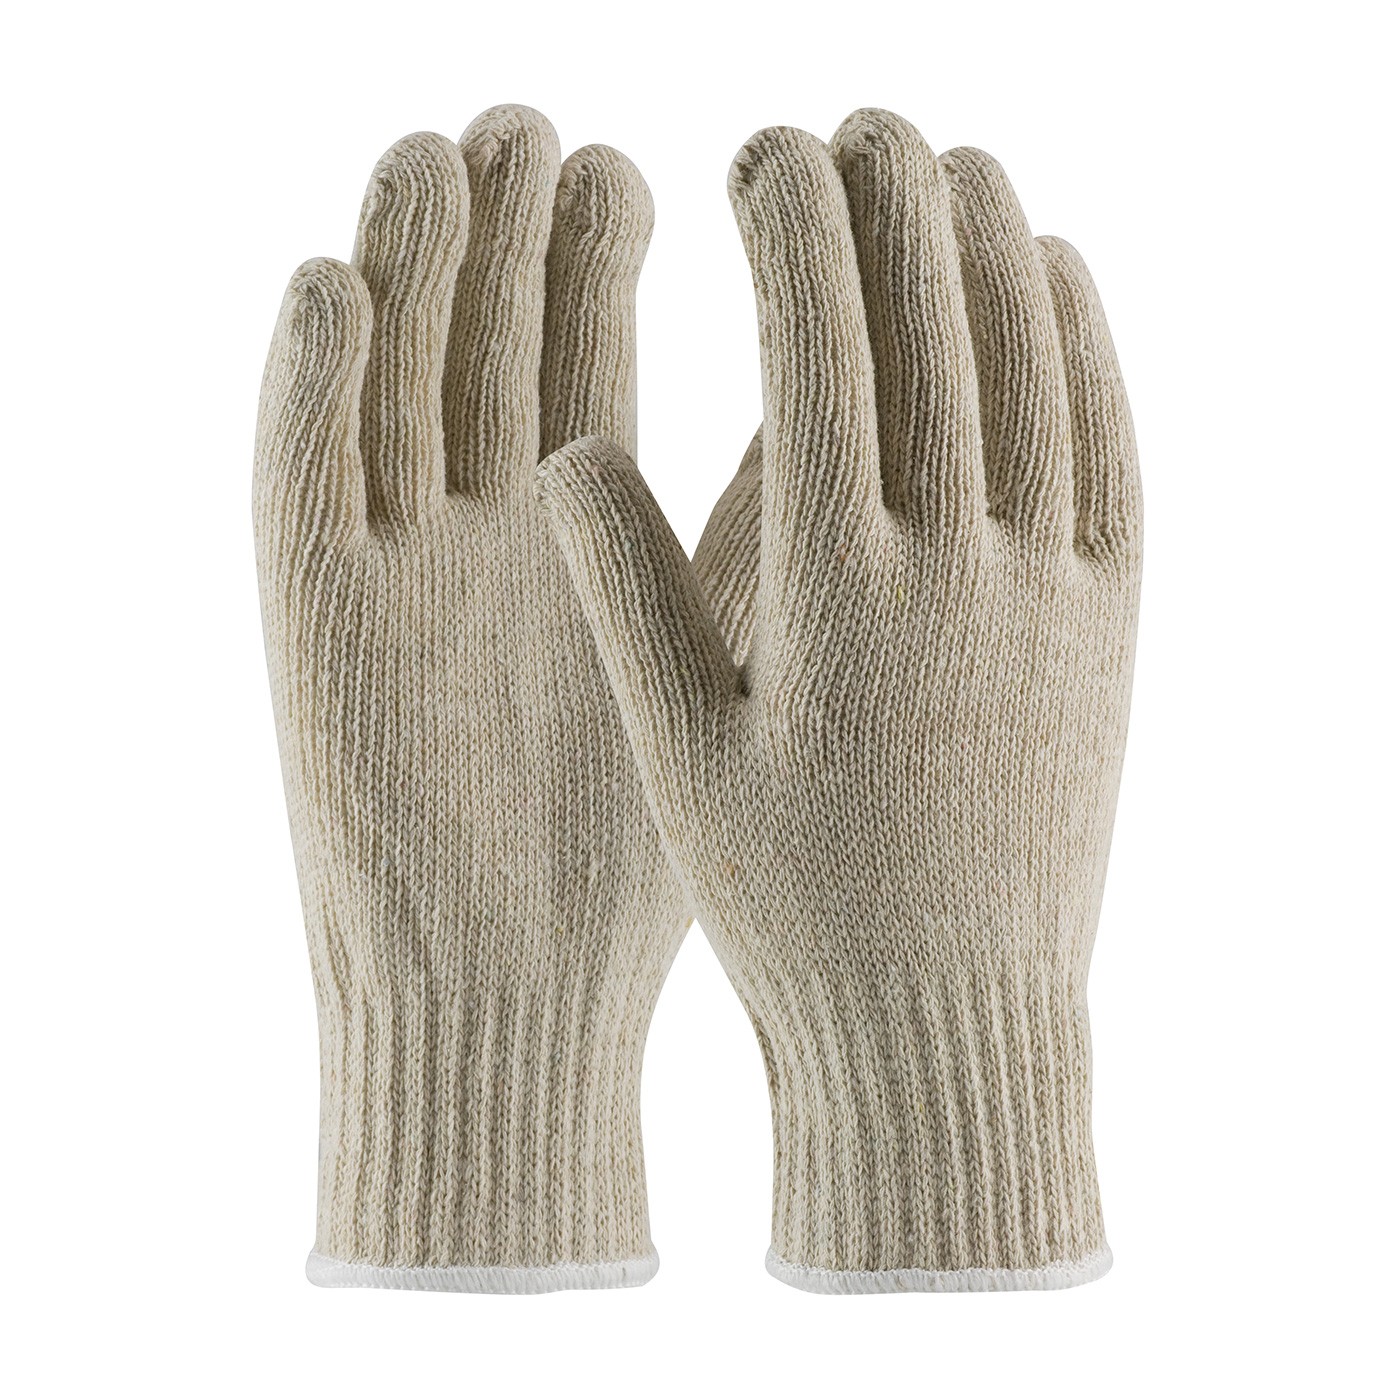 PIP® Extra Heavy Weight Seamless Knit Cotton / Polyester Glove - 7 Gauge  (#714S)